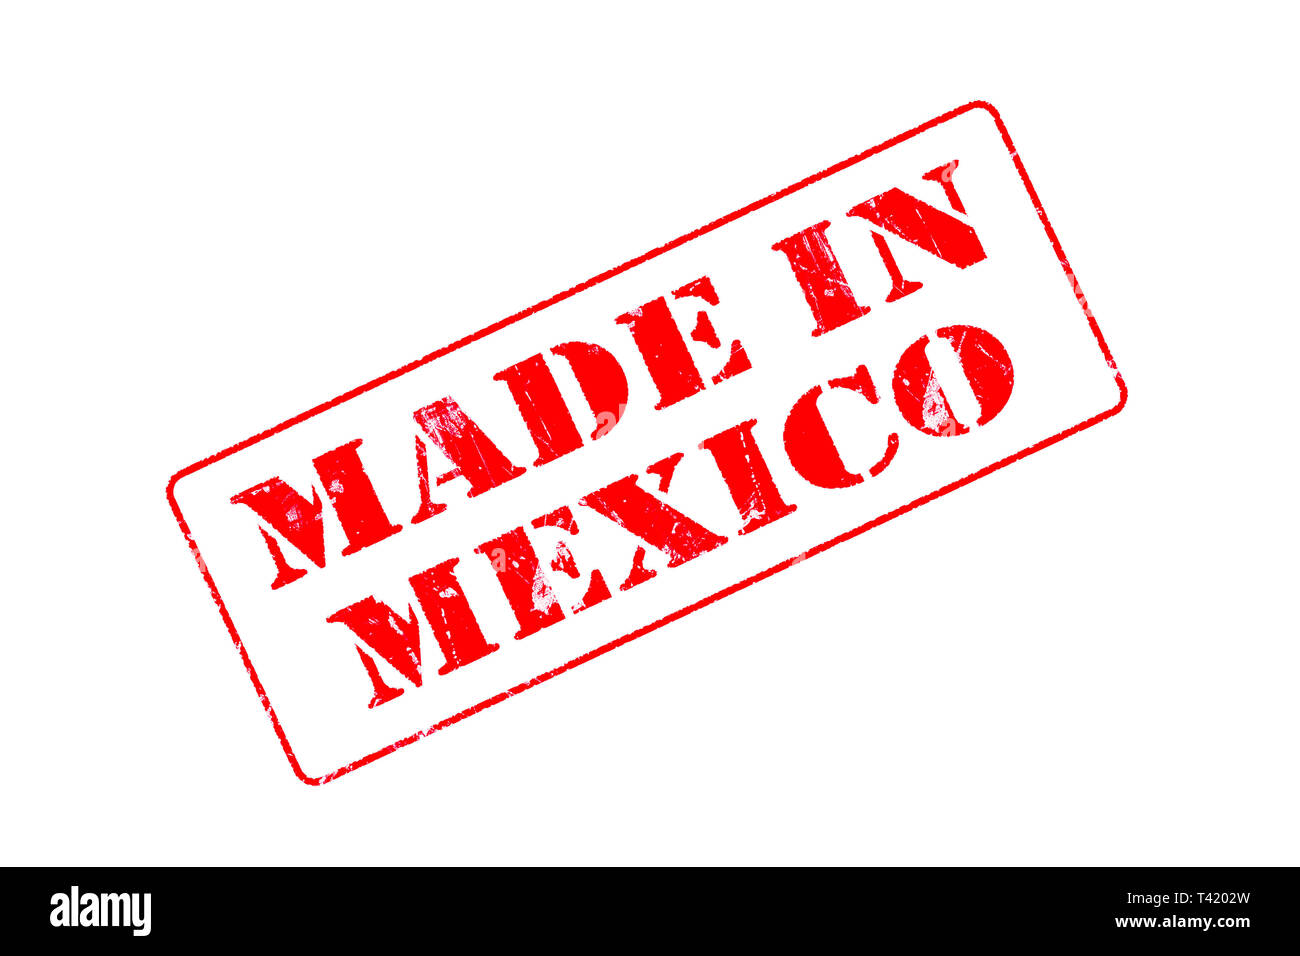 Rubber stamp concept showing a red stamp reading Made in Mexico Stock Photo